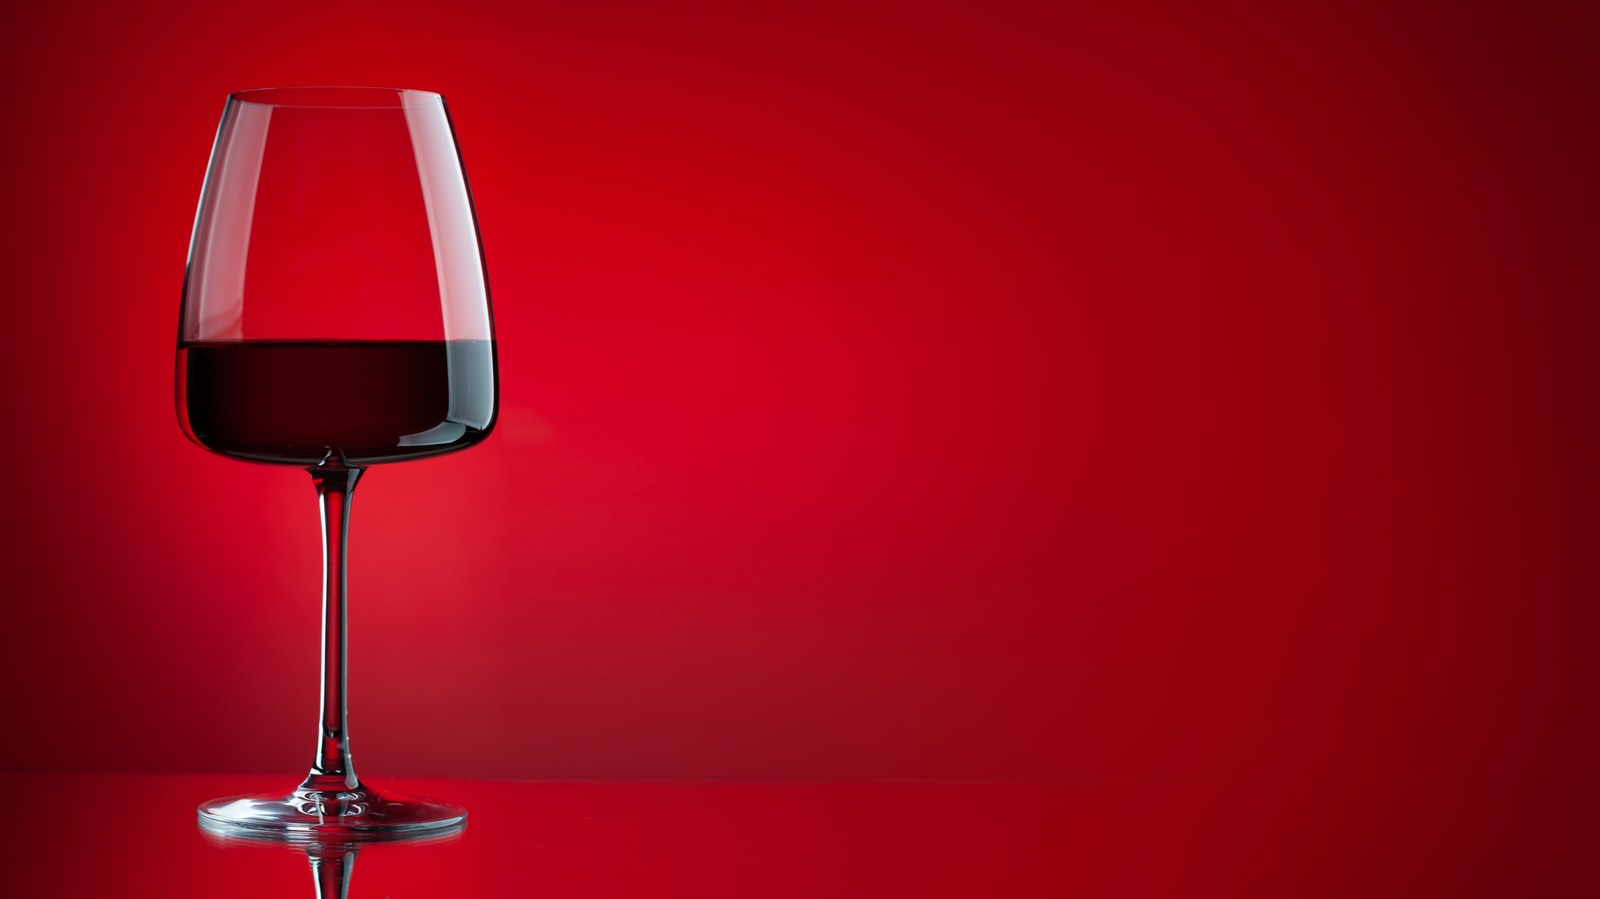 What You Should Know If You Drink Red Wine For Its Health Benefits